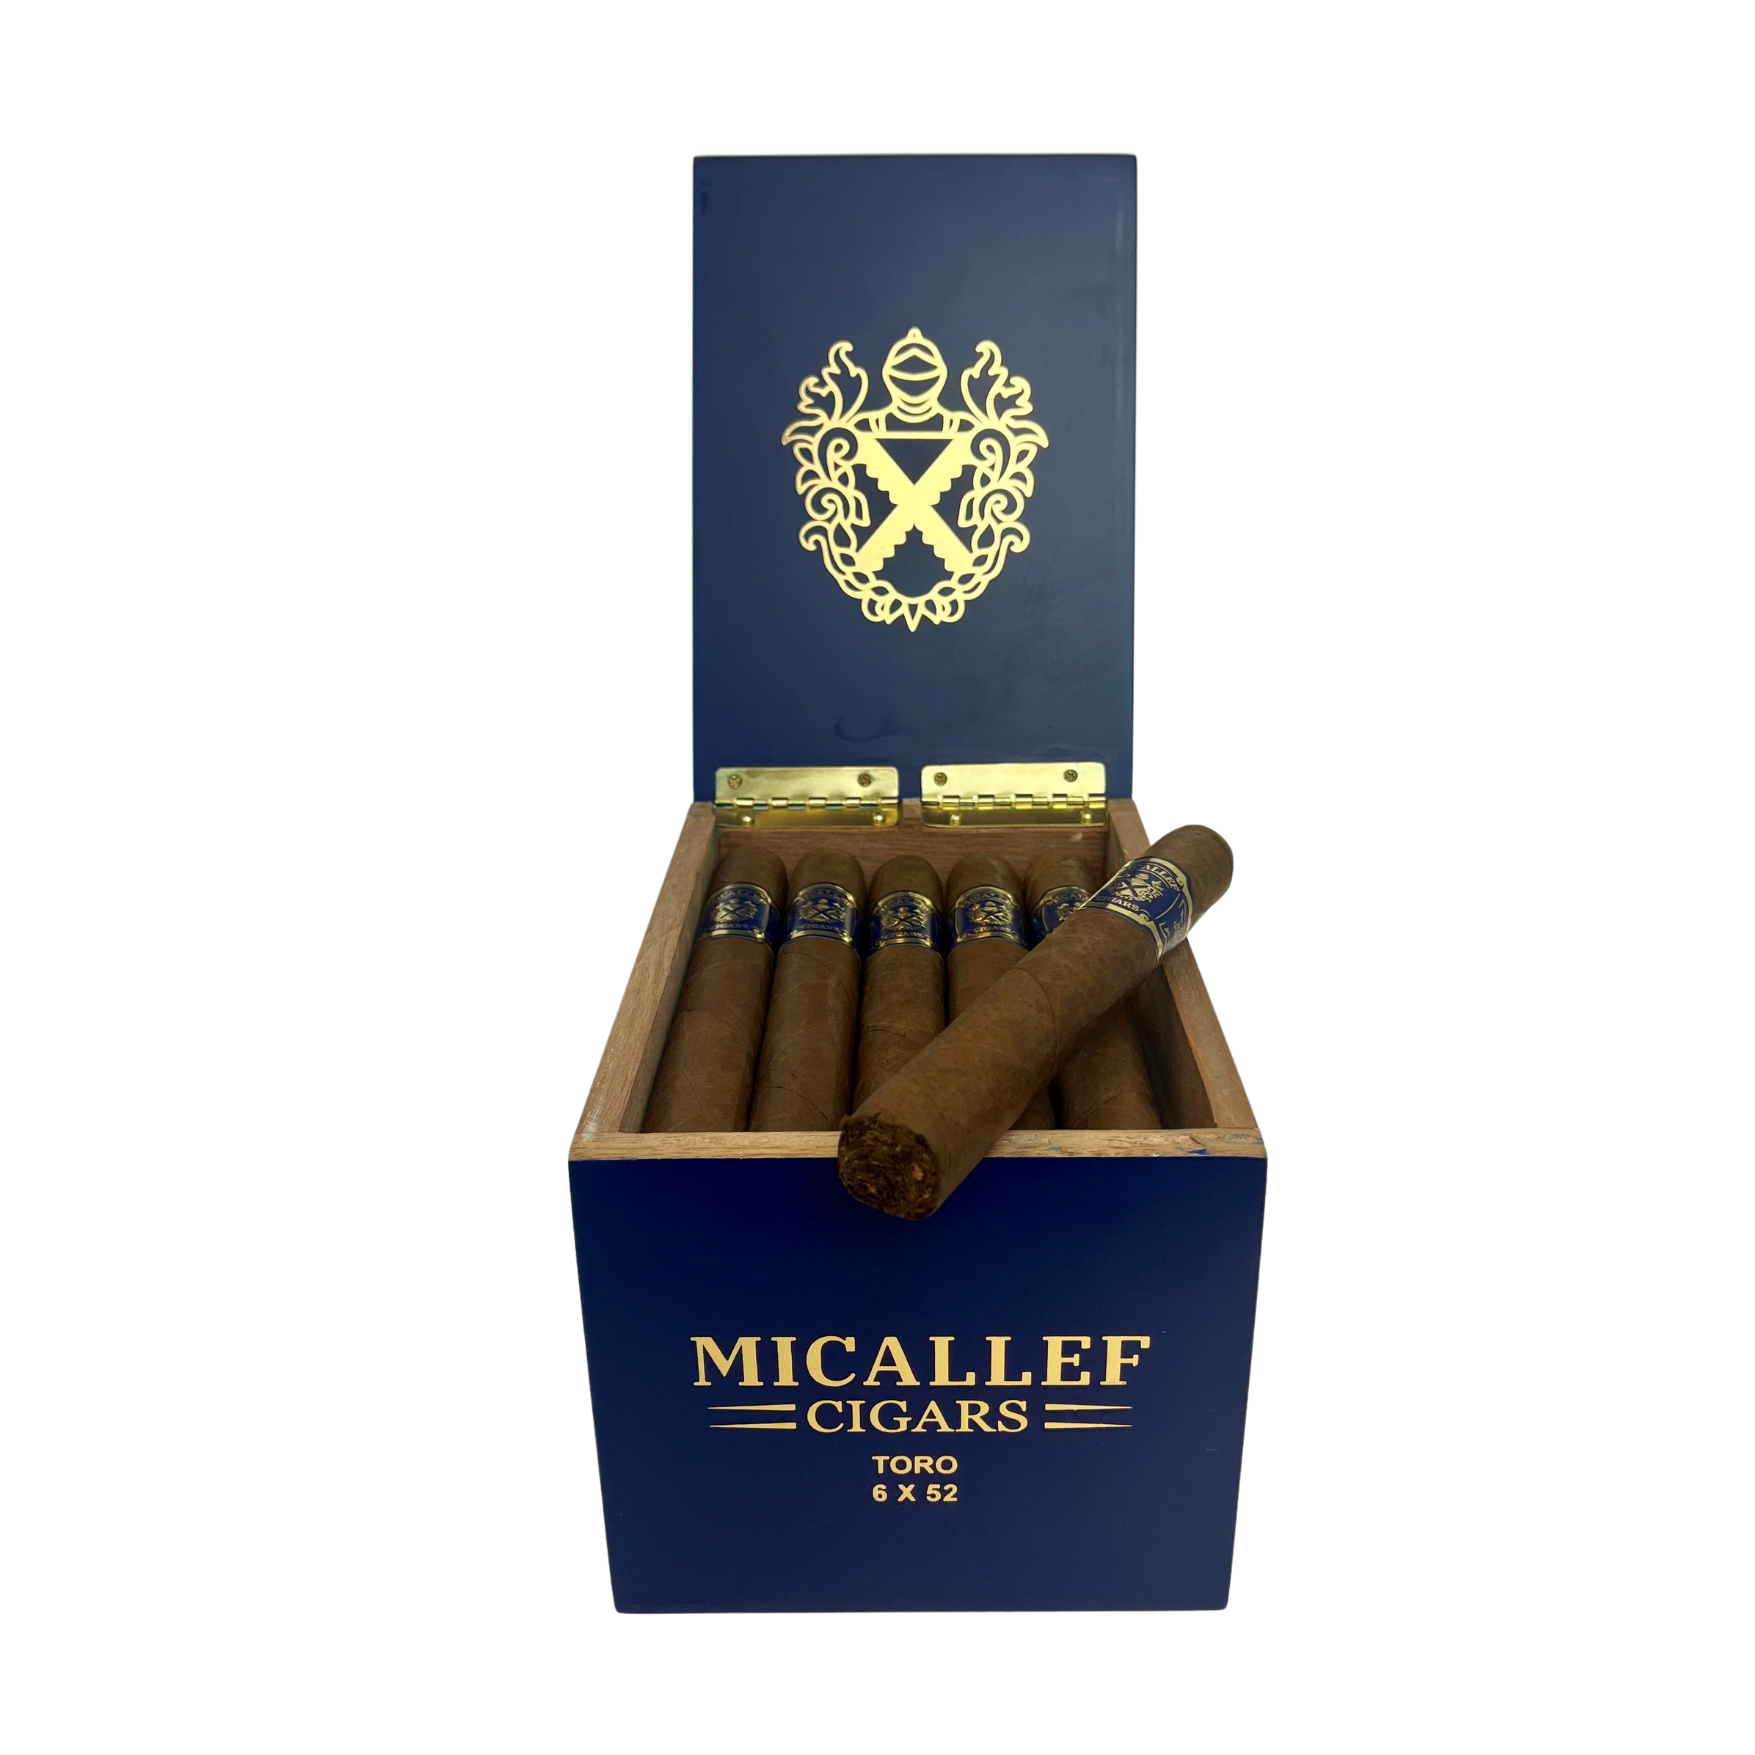 Micallef Blue Box with Cigar.png